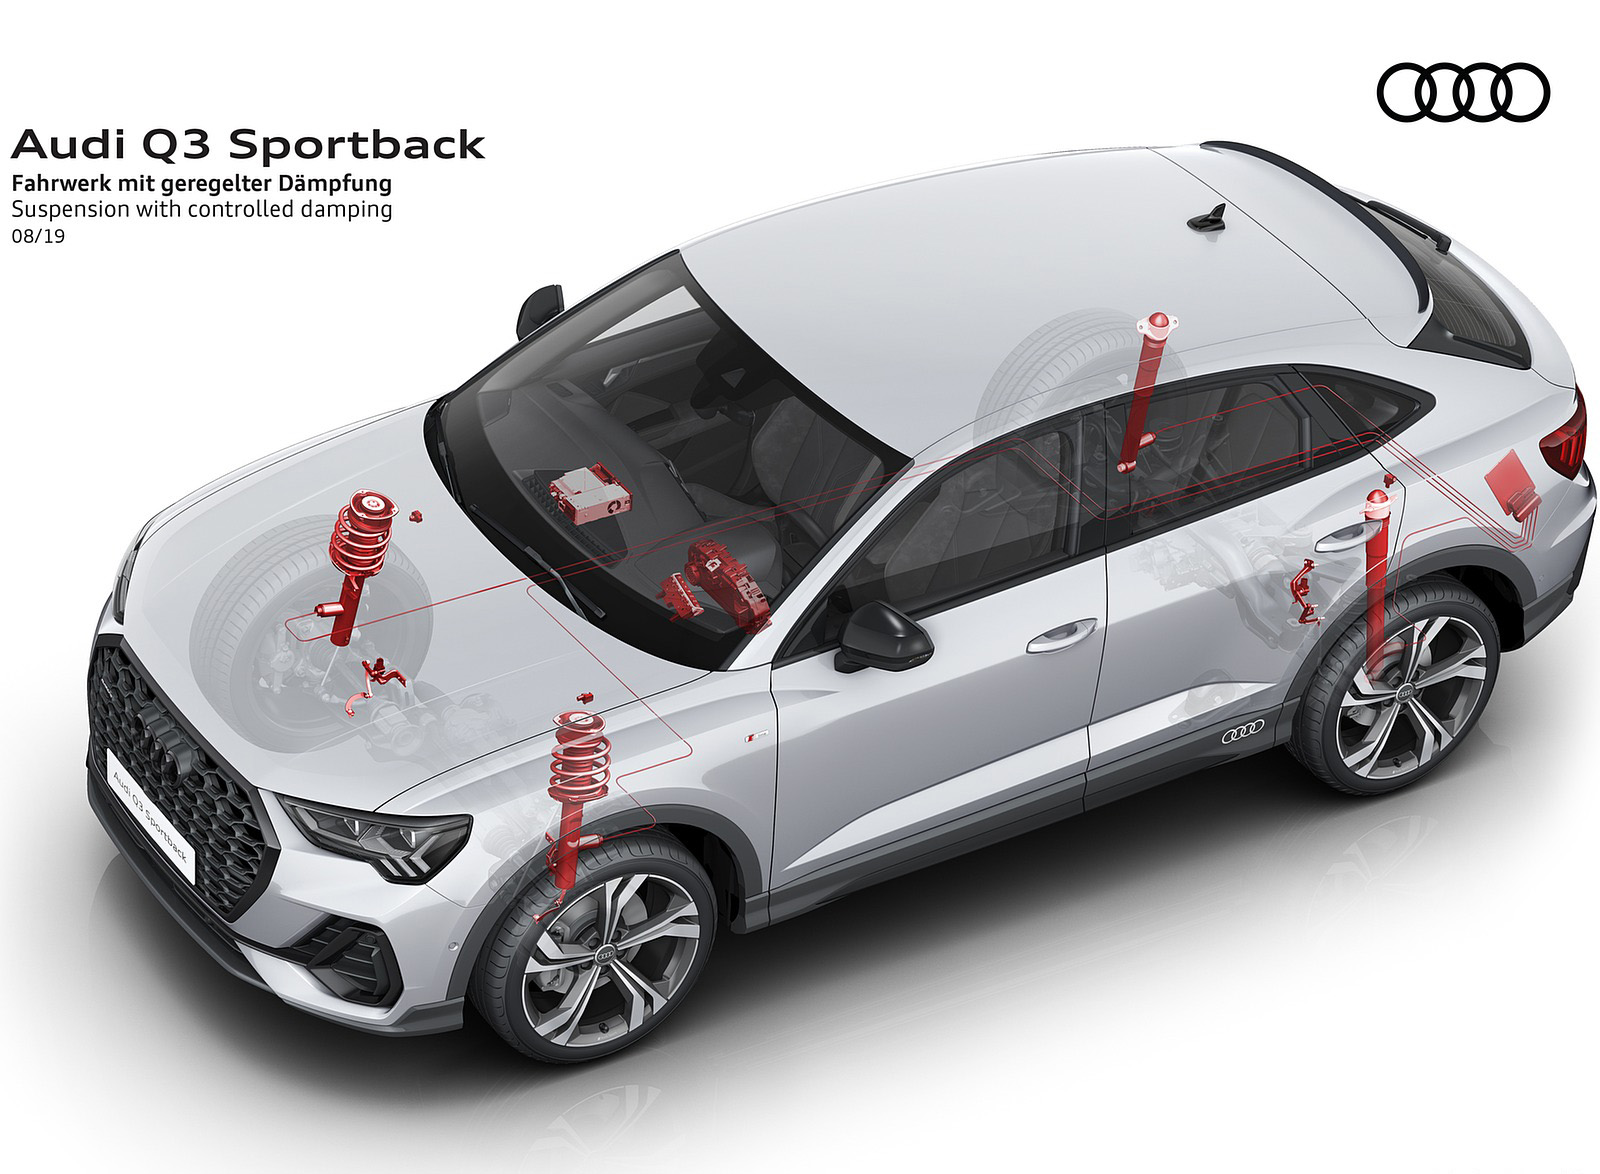 2020 Audi Q3 Sportback Suspension with controlled damping Wallpapers #251 of 285